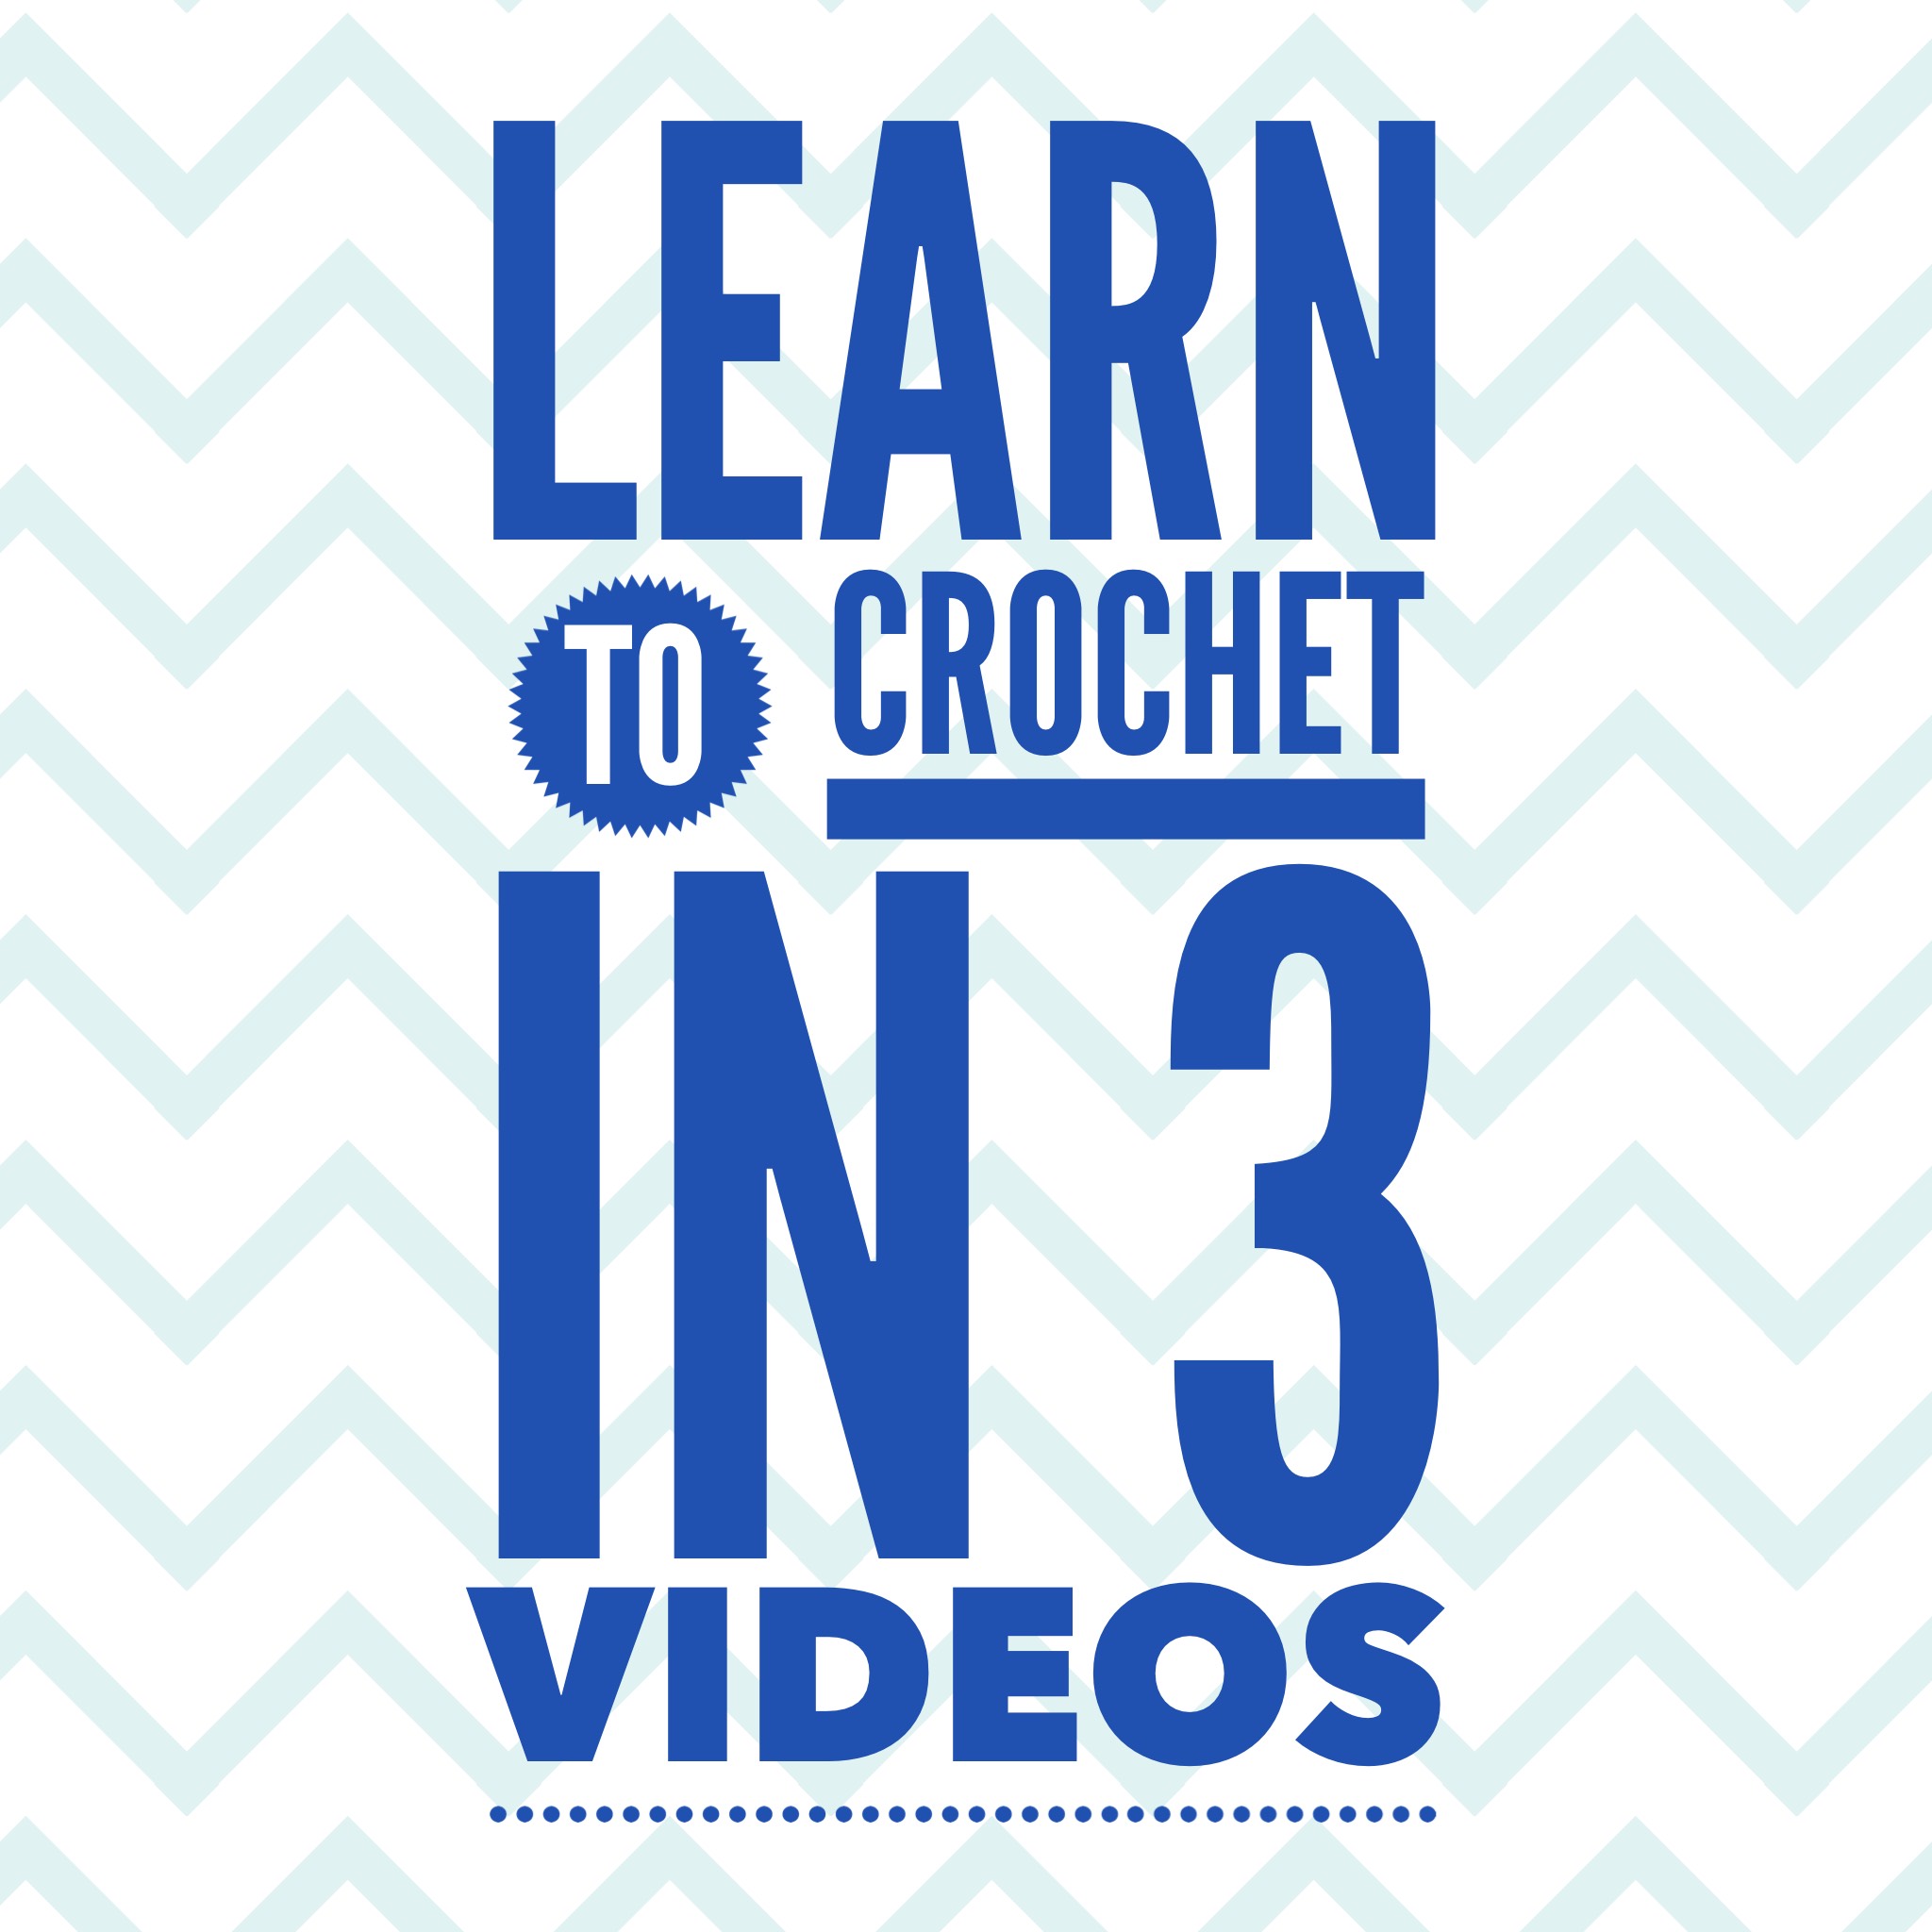 Get Started Crocheting with These 3 Videos